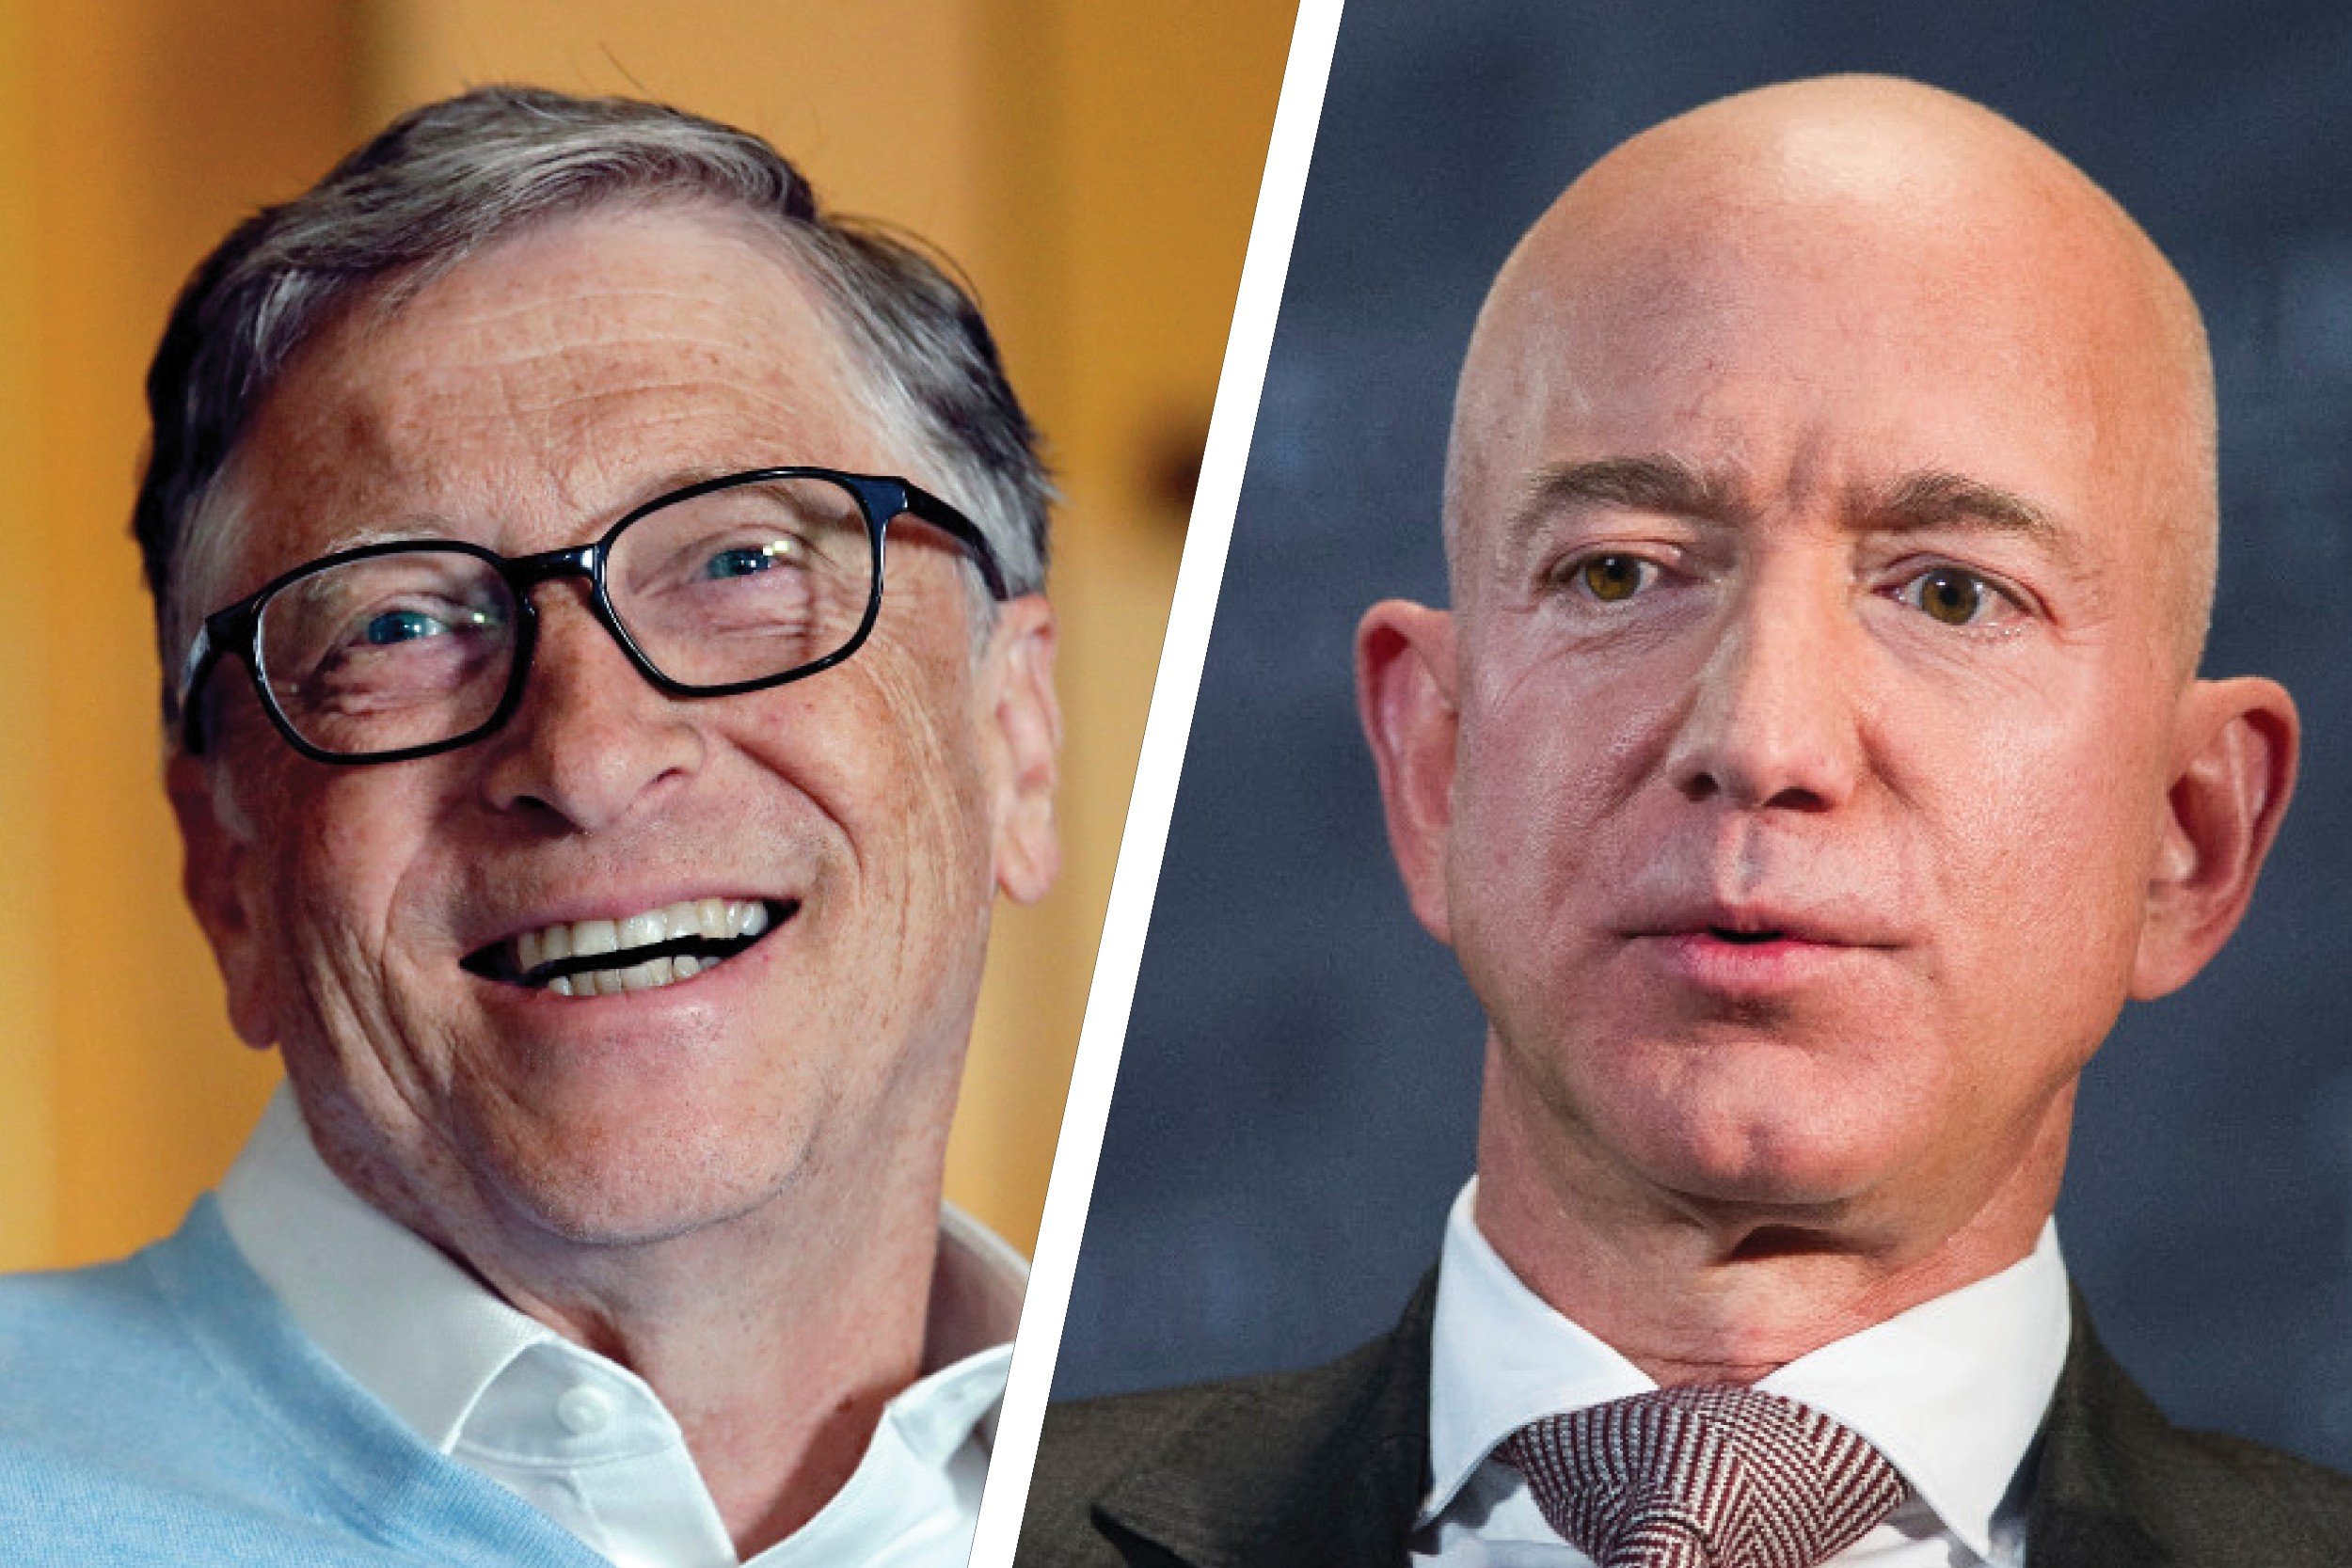 Bill Gates, former Microsoft CEO and co-chair of the Bill & Melinda Gates Foundation, has unseated Jeff Bezos as the richest person on the planet. Photo: Xinhua